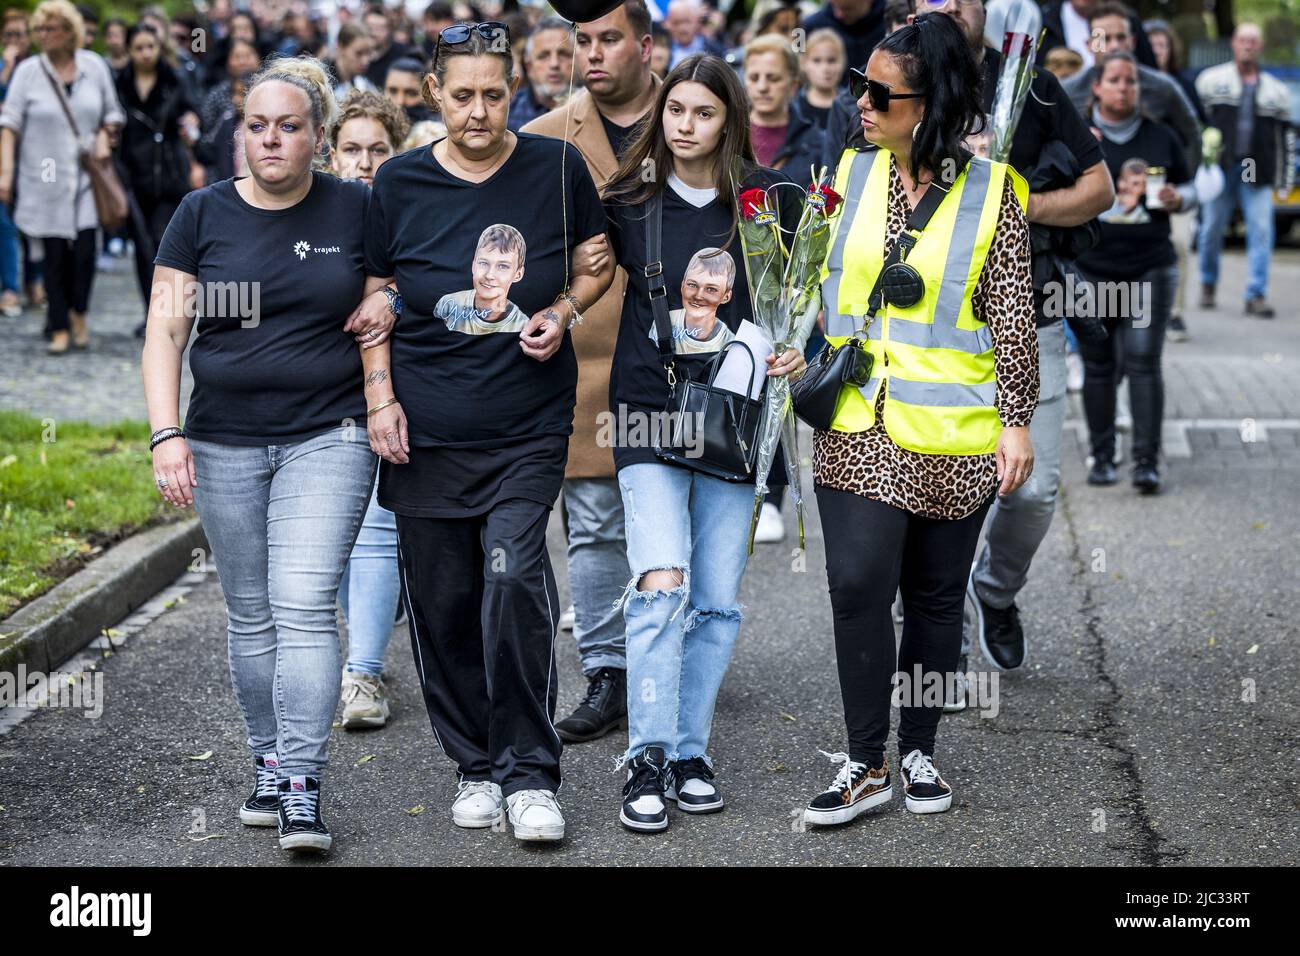 2022-06-09 18:48:06 MAASTRICHT - Relatives join a silent march in memory of 9-year-old Gino in the neighborhood where he lived. The boy disappeared from a playground on June 1, and his remains were found a few days later at a house. A 22-year-old suspect has been arrested. ANP MARCEL VAN HOORN netherlands out - belgium out Stock Photo